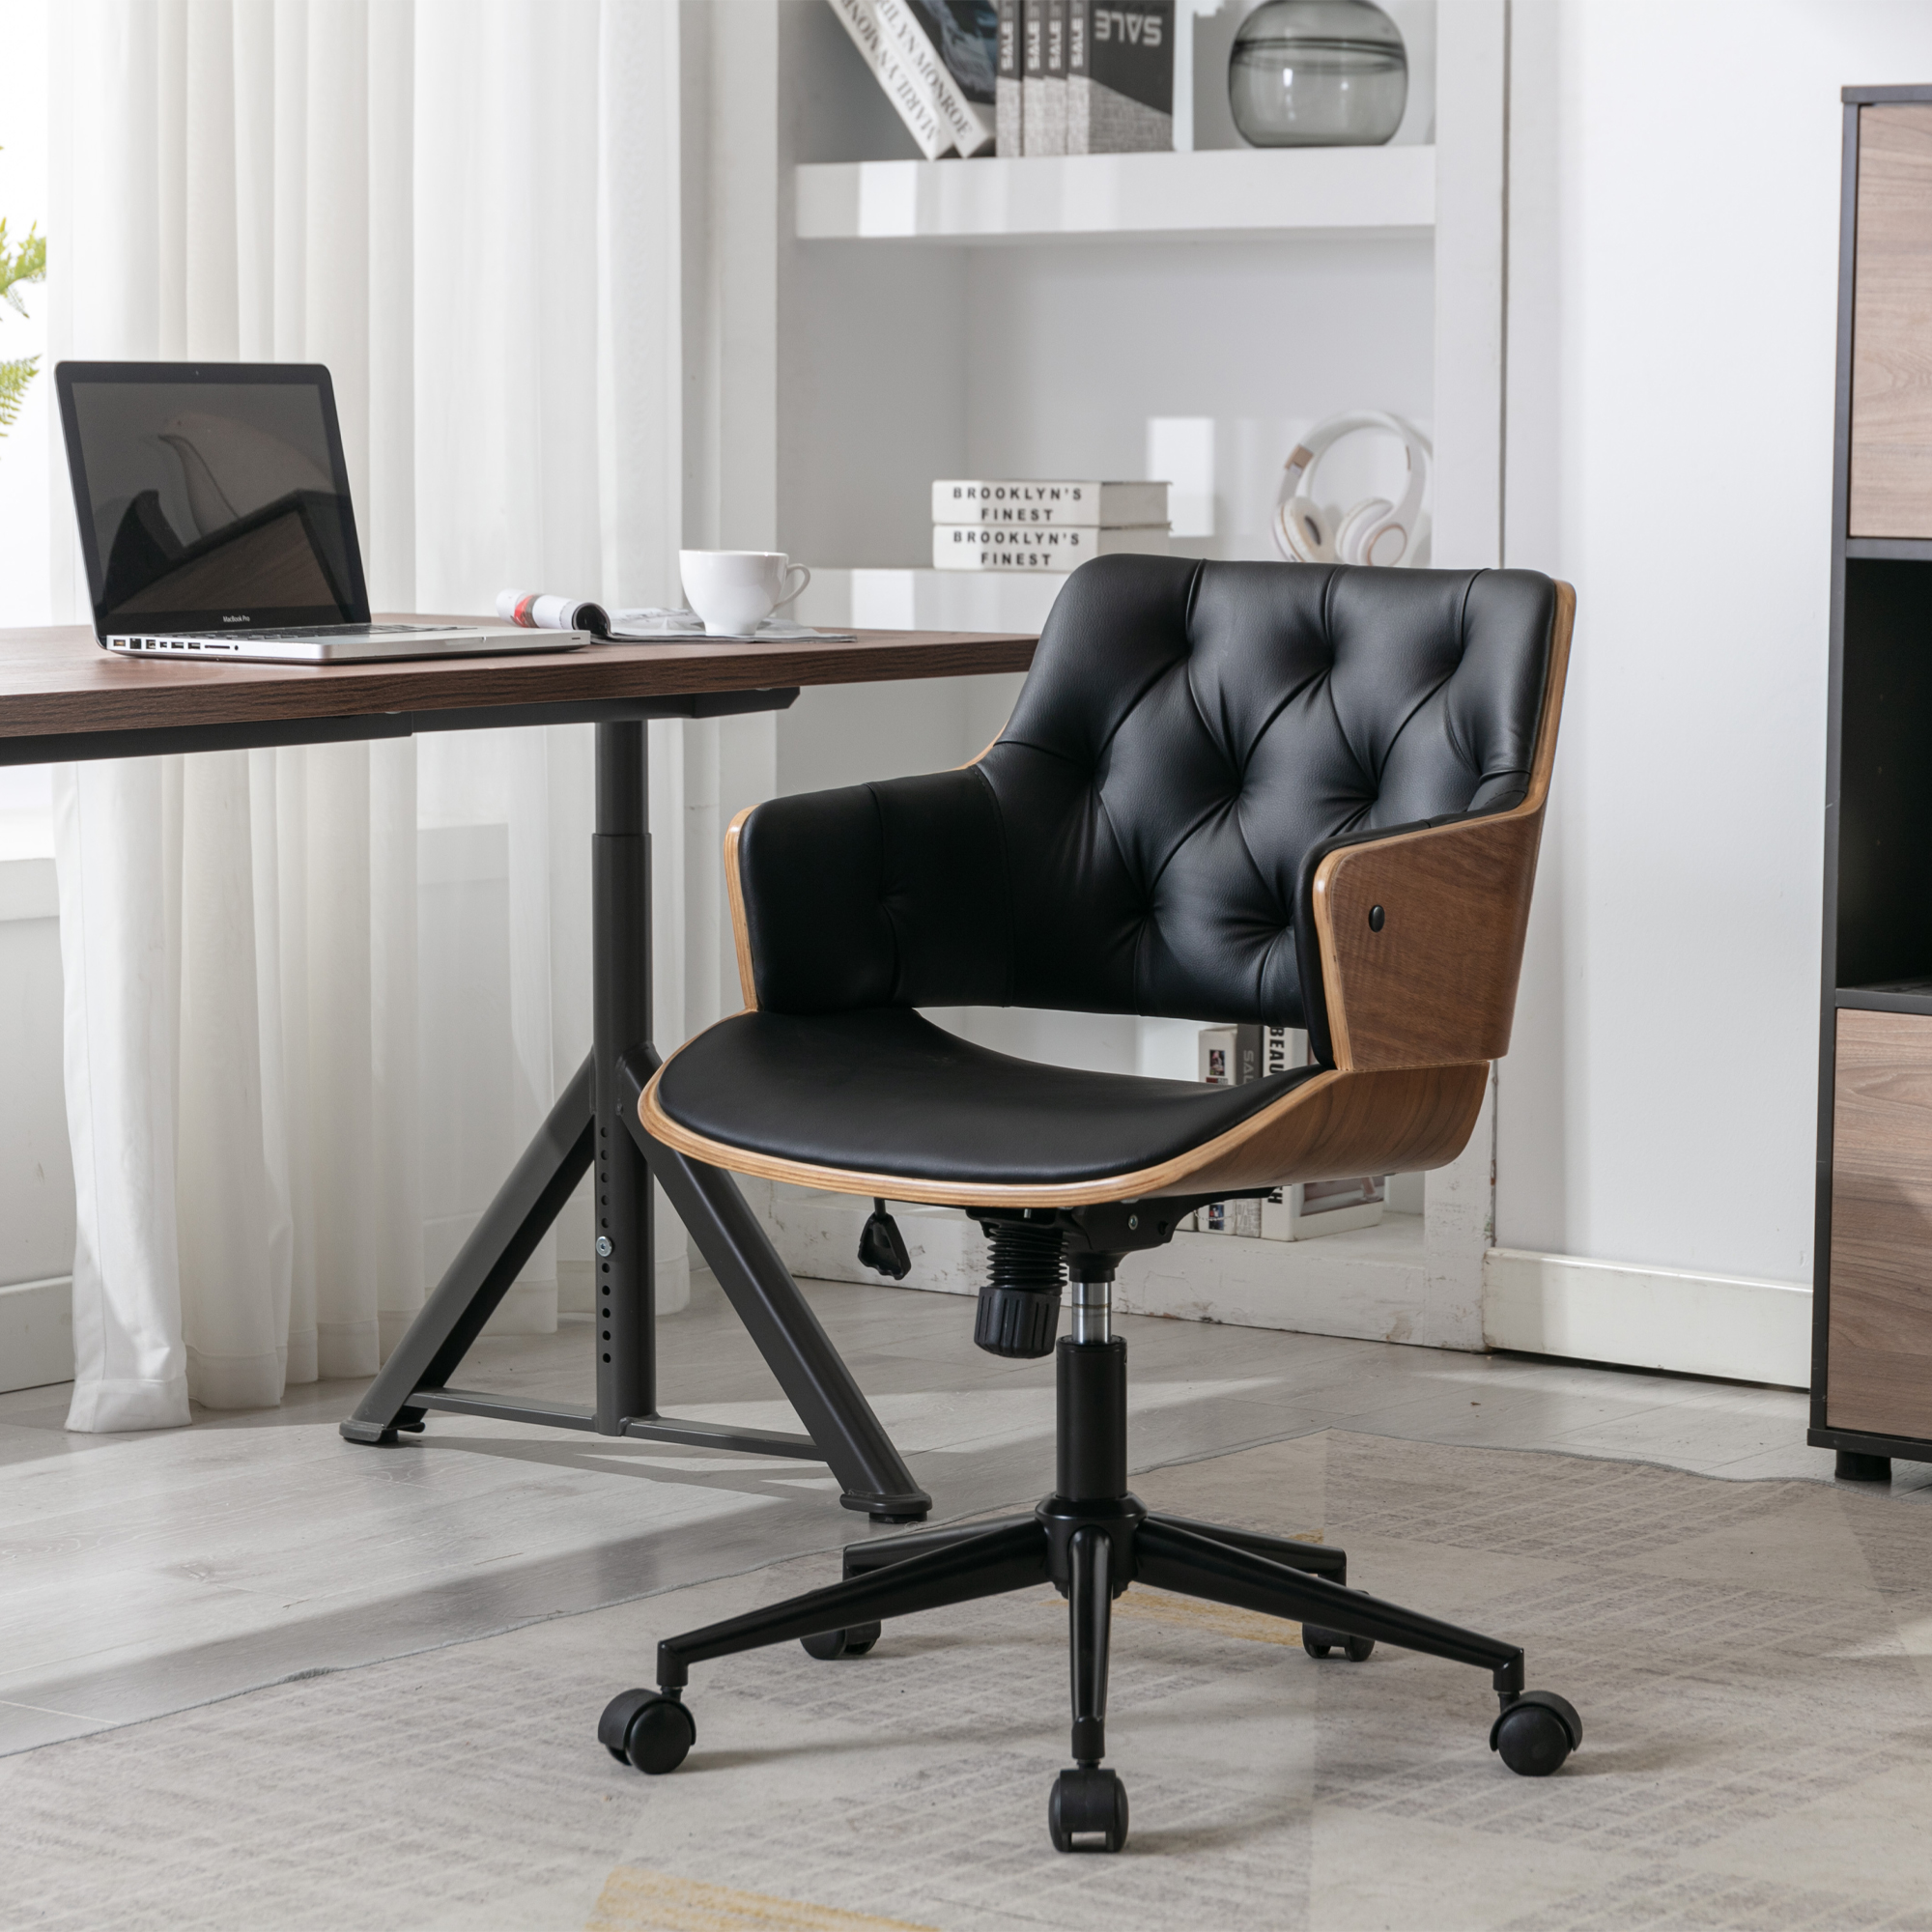 HengMing Bentwood Adjustable Office Chair , black PU Leather Upholstery and black foot